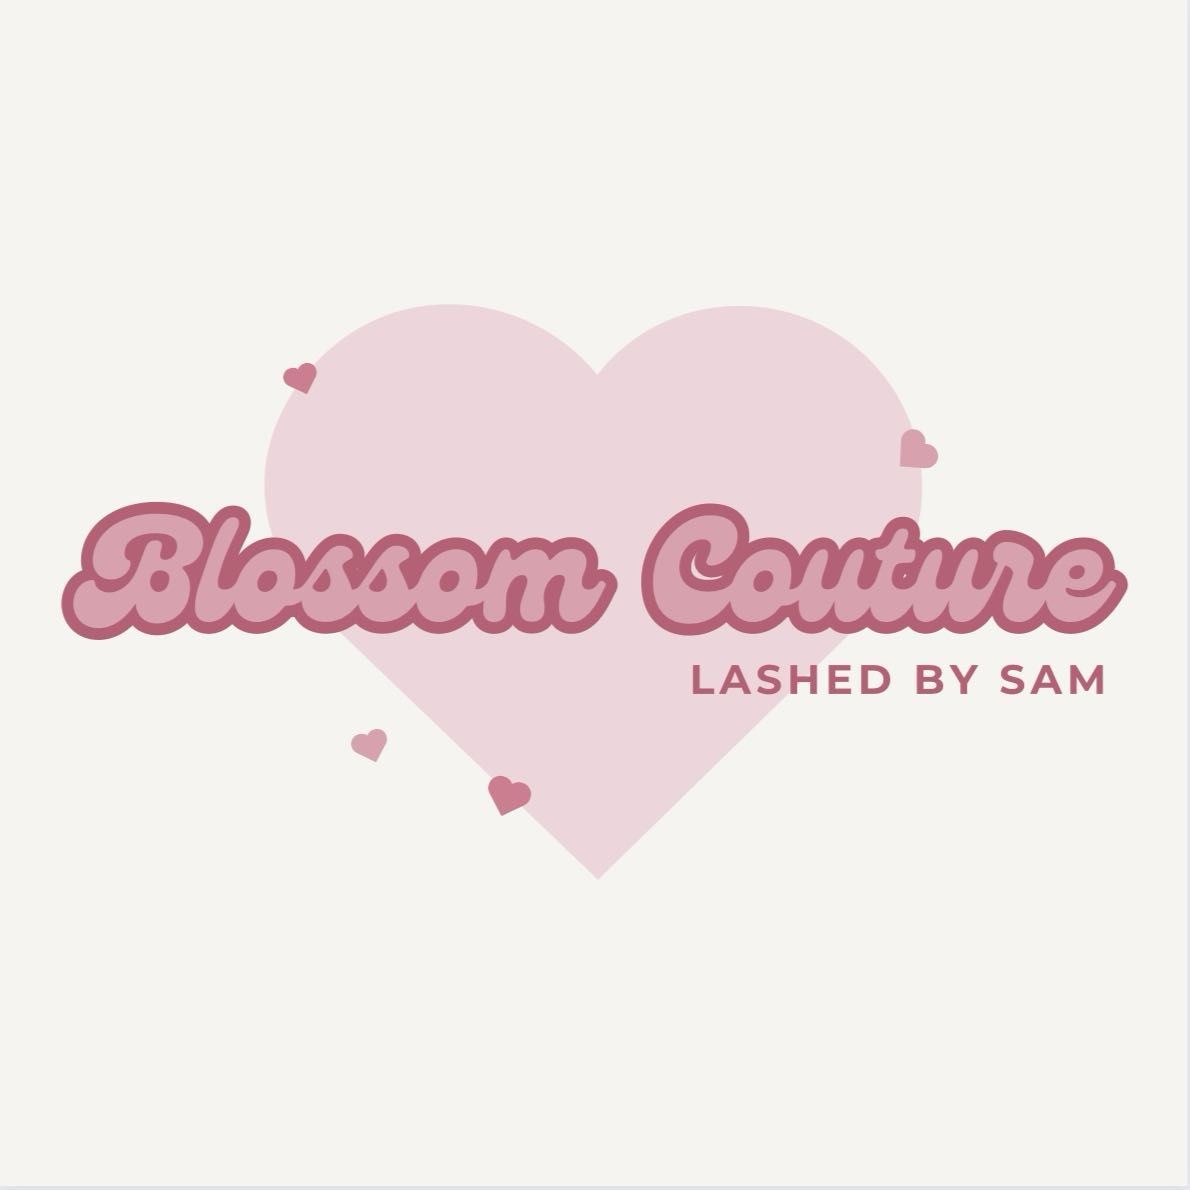 Blossom Couture Beauty, 5415 wales, San Antonio, 78223